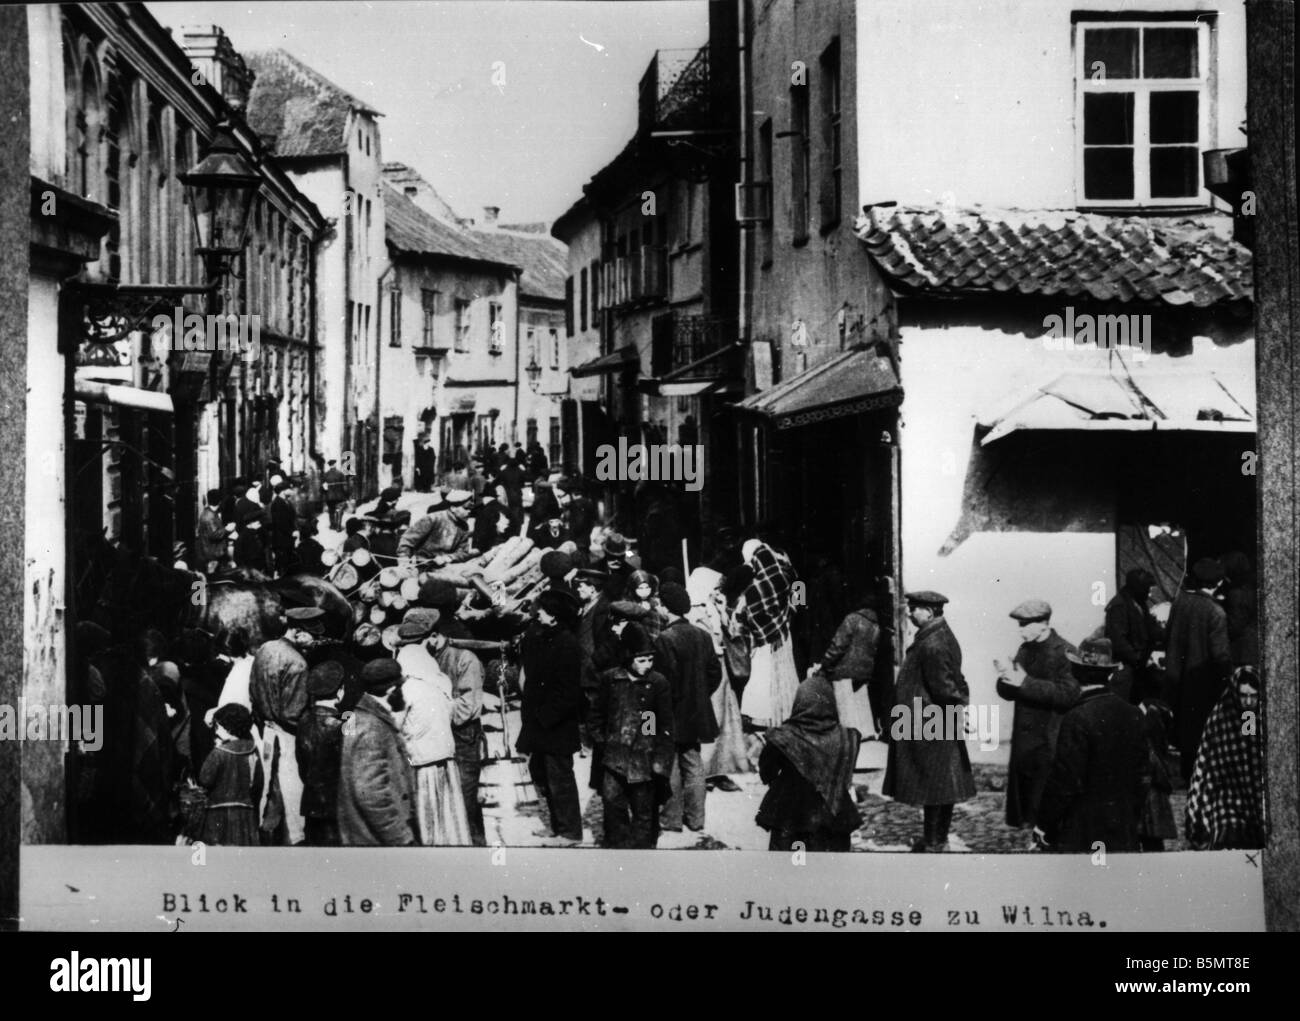 9IS 1915 0 0 A1 49 Juwish street in Vilnius Photo 1915 History of Judaism Eastern Jews View of the meat market or Jewish street Stock Photo